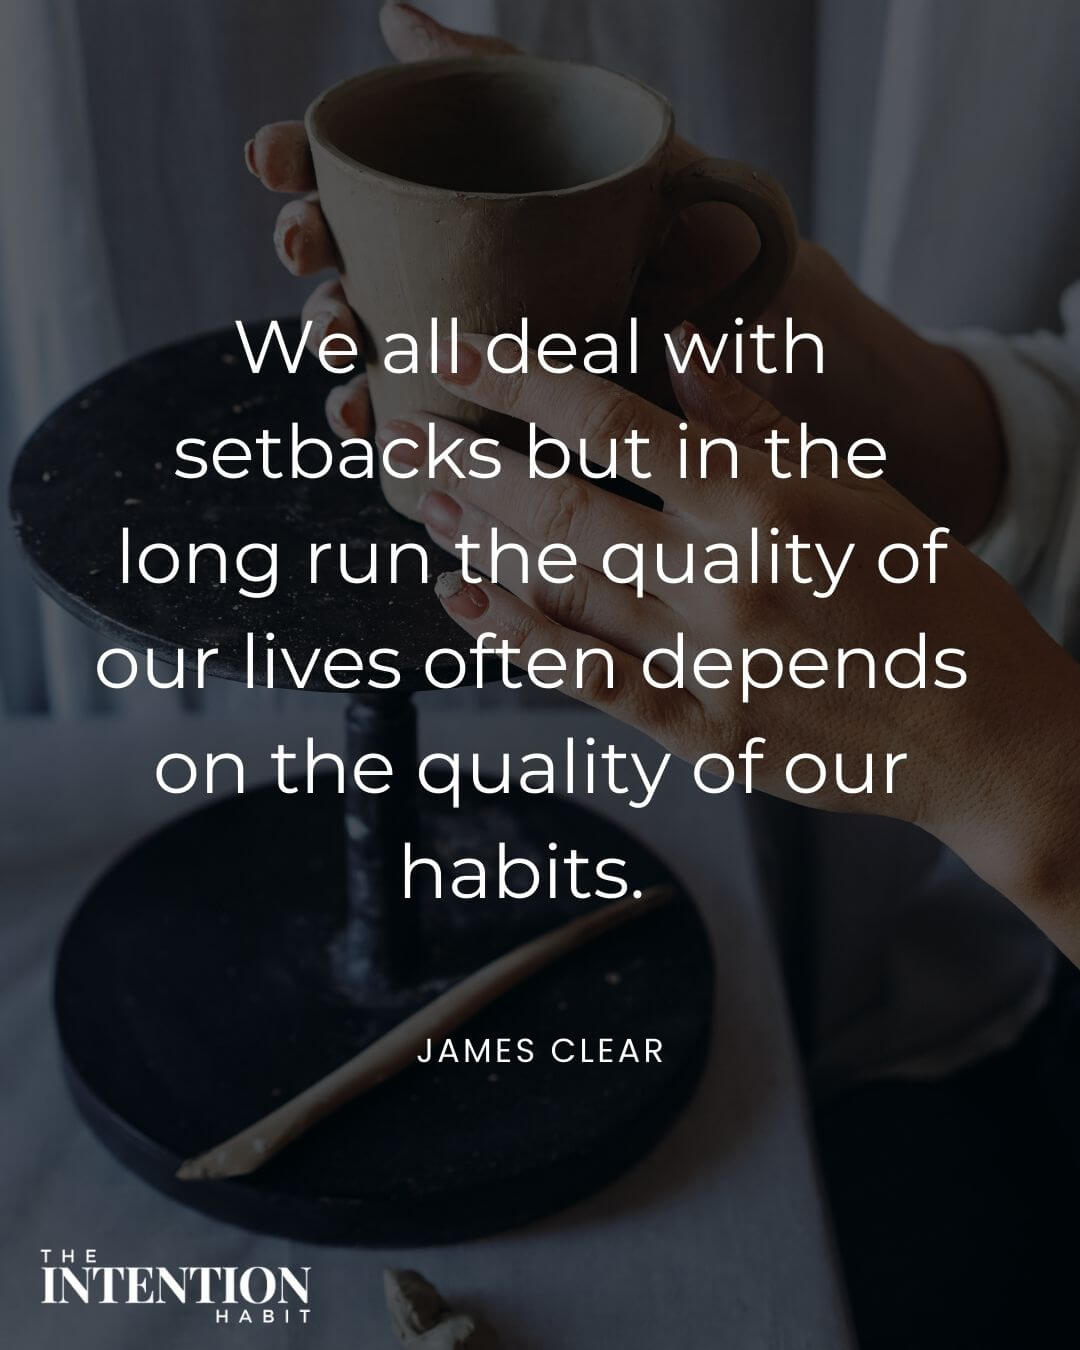 Intentional living quote - we deal with setbacks but in the long run the quality of our lives often depends on the quality of our habits